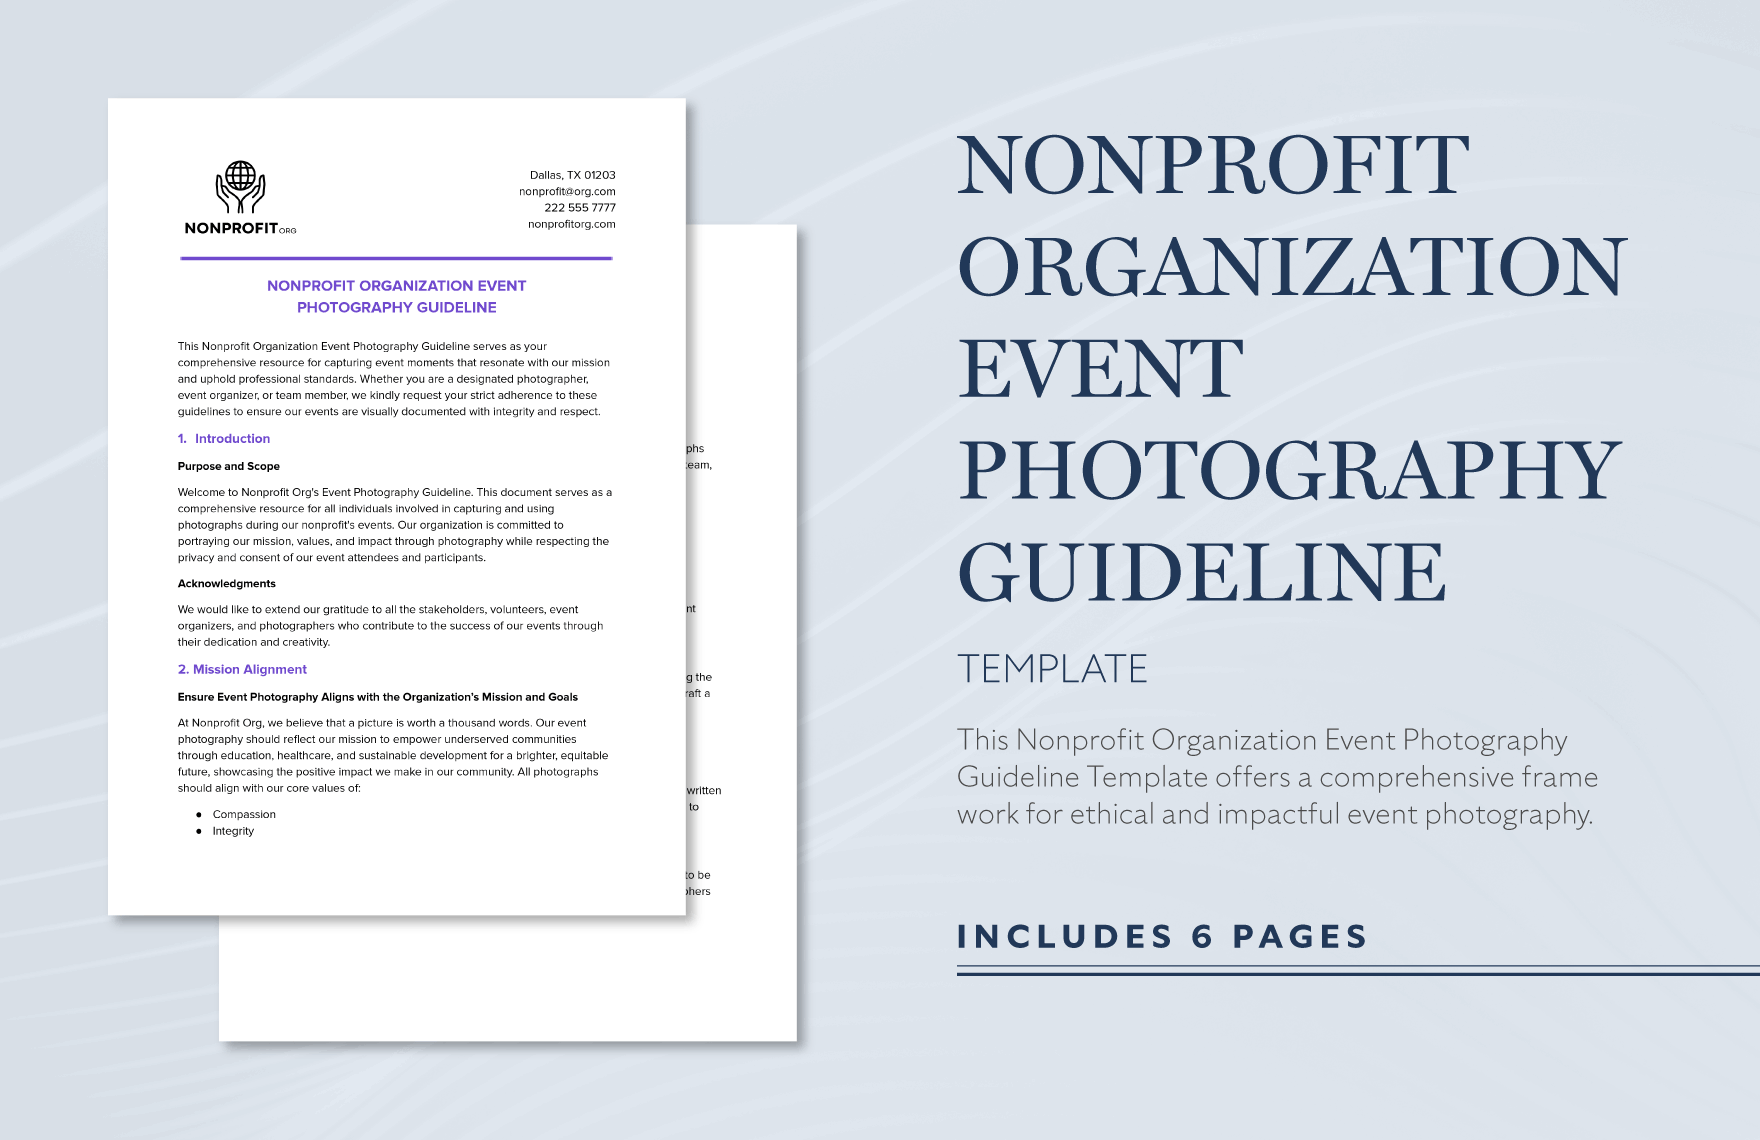 Nonprofit Organization Event Photography Guideline Template